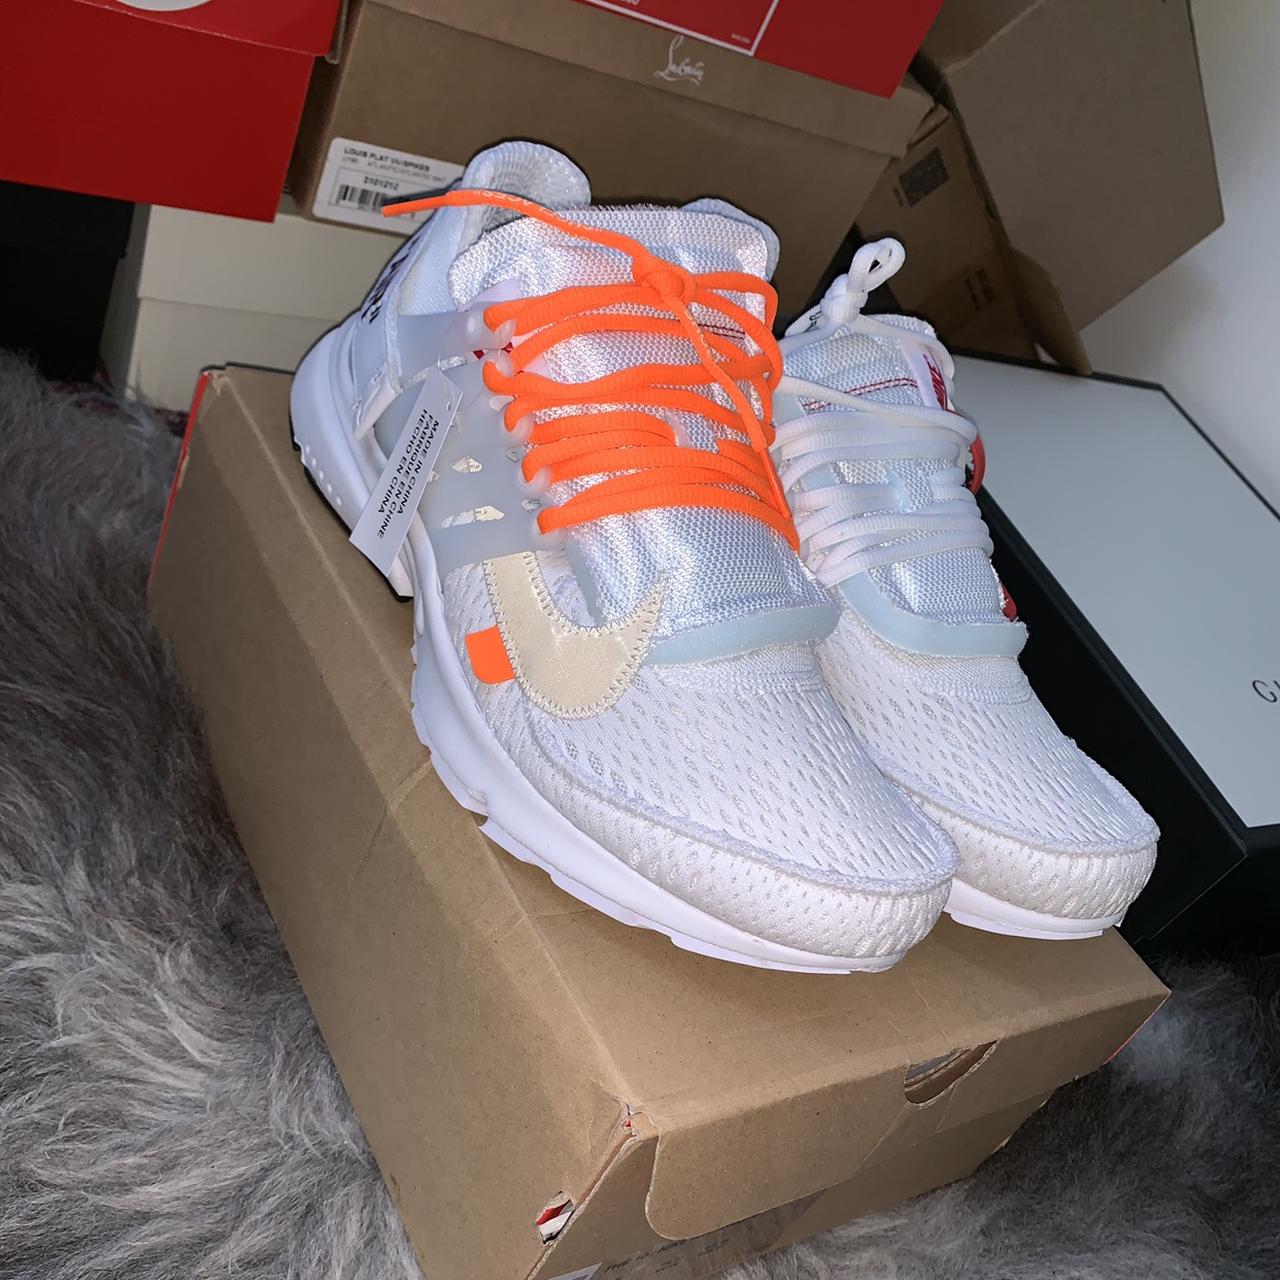 off-white nike presto On Sale - Authenticated Resale